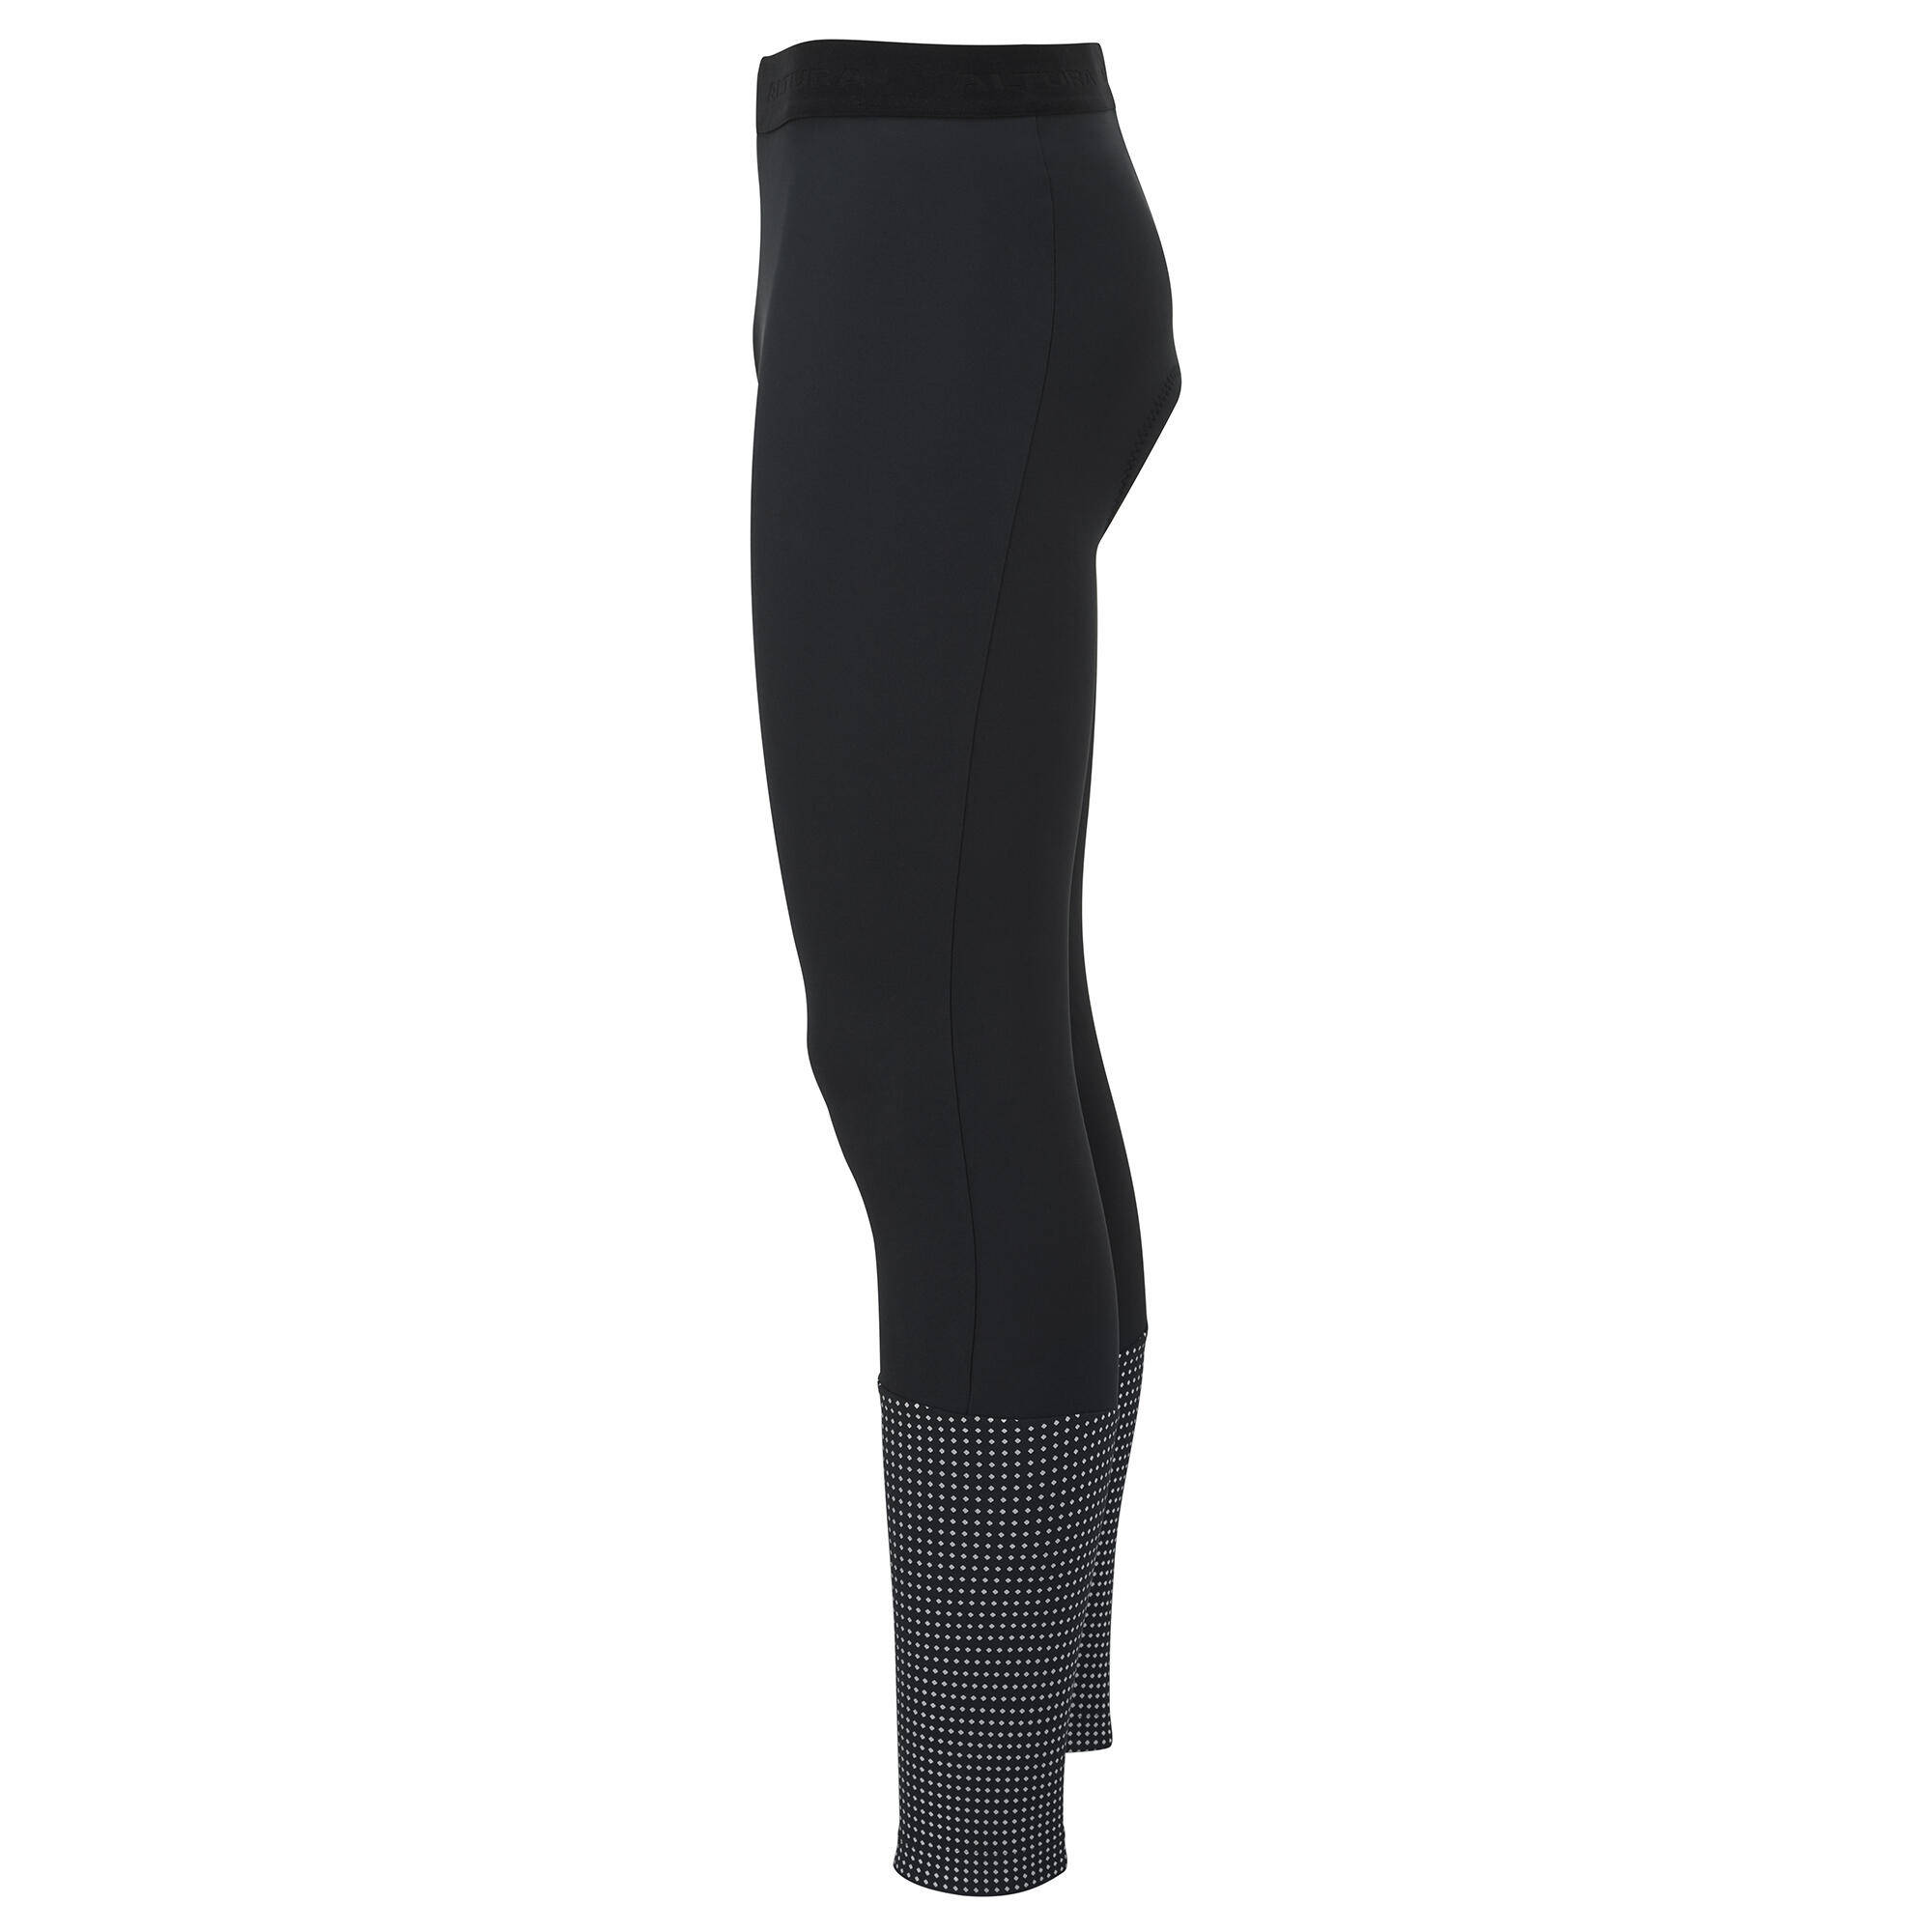 Nightvision DWR Men's Cycling Waist Tights 5/5